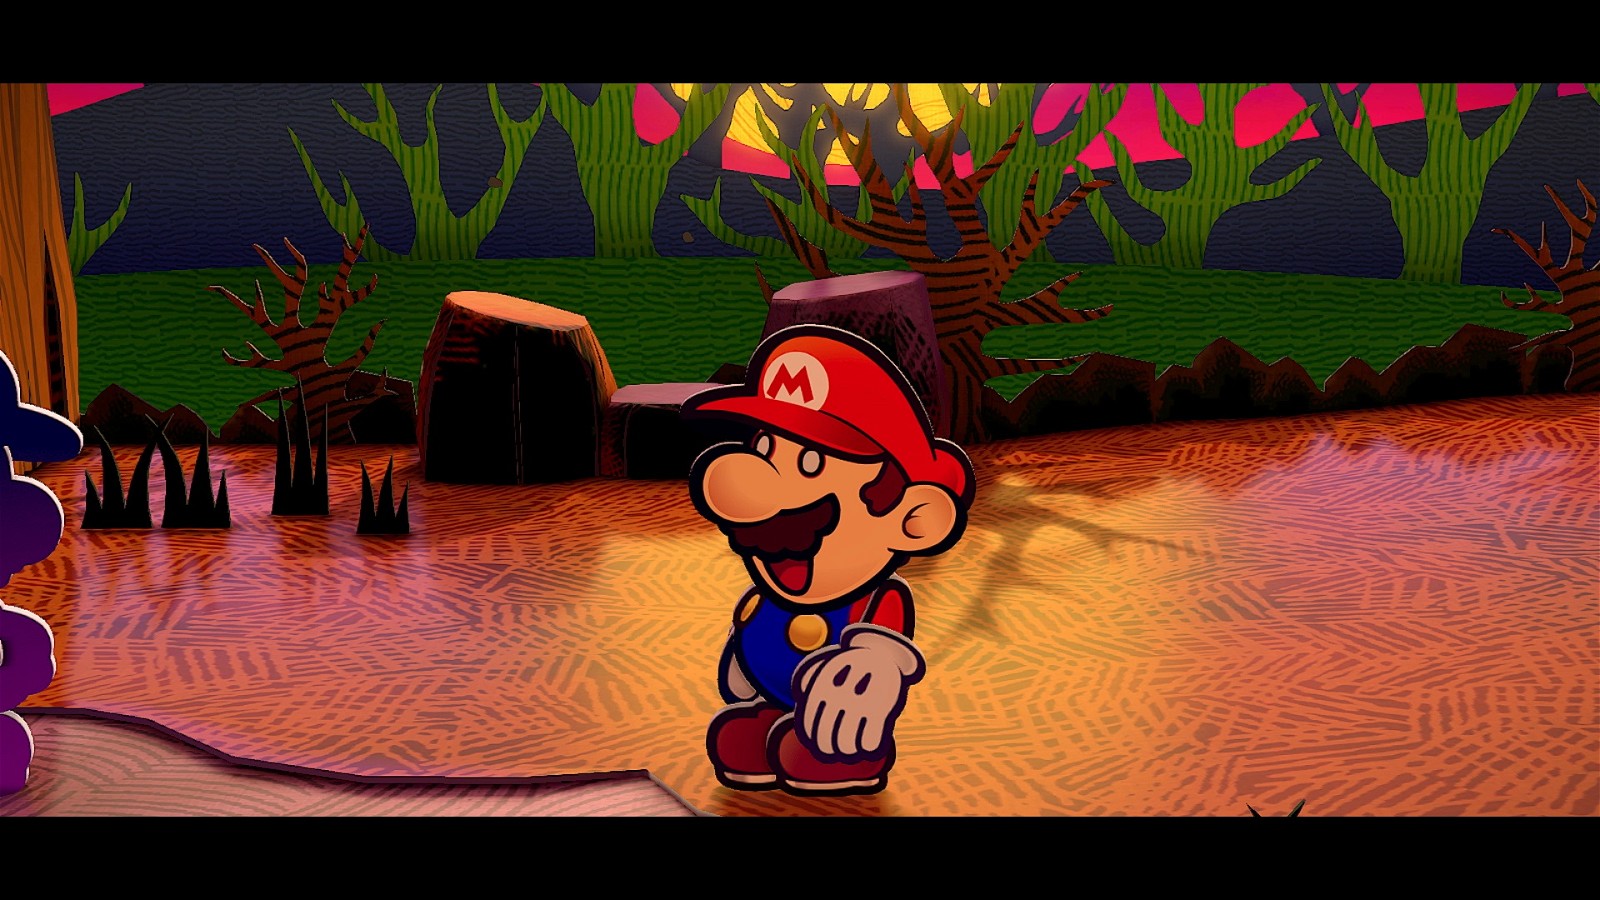 Paper Mario: The Thousand-Year Door is getting remastered for the Nintendo Switch.